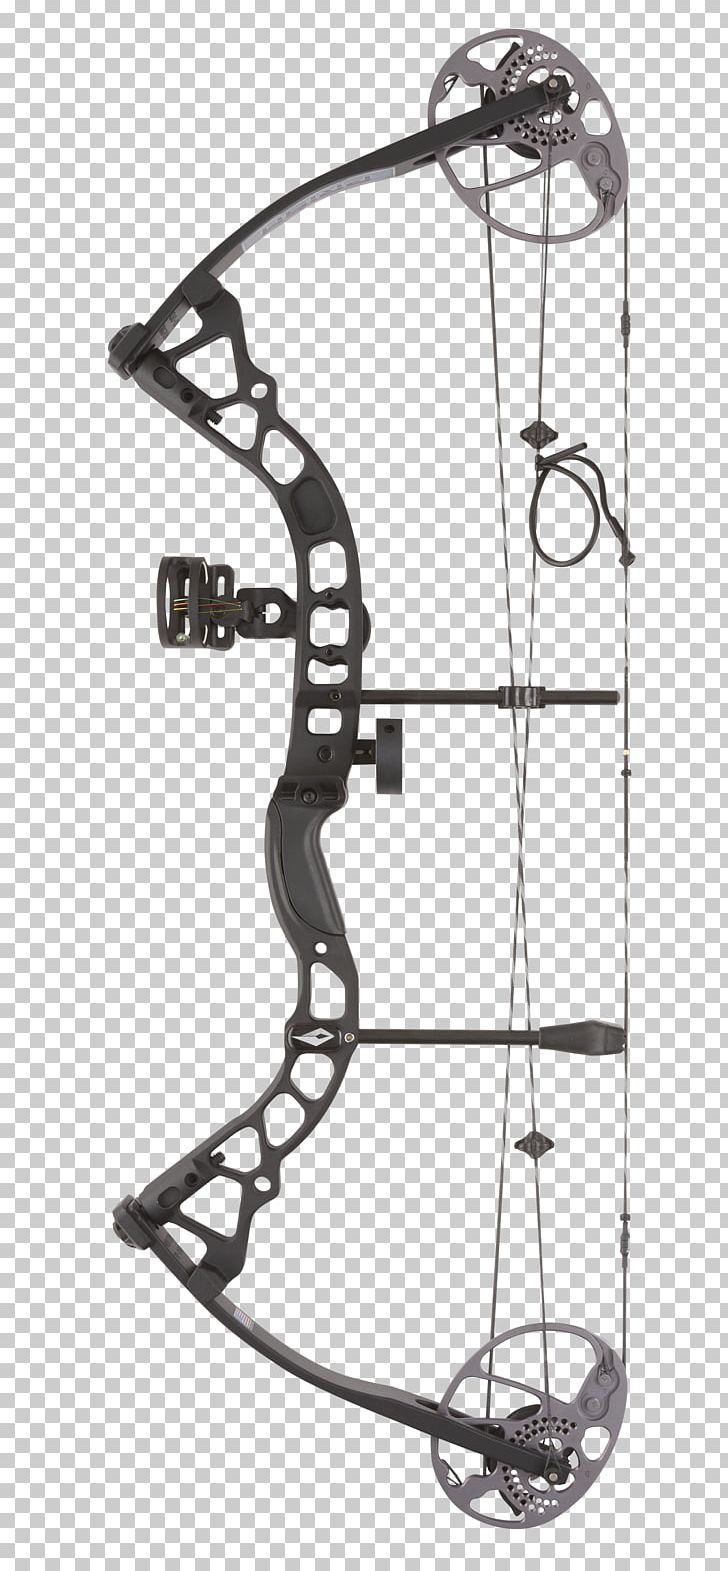 Compound Bows Bow And Arrow Diamond Archery Recurve Bow PNG, Clipart, Archery, Arrow, Bit, Black And White, Bow Free PNG Download